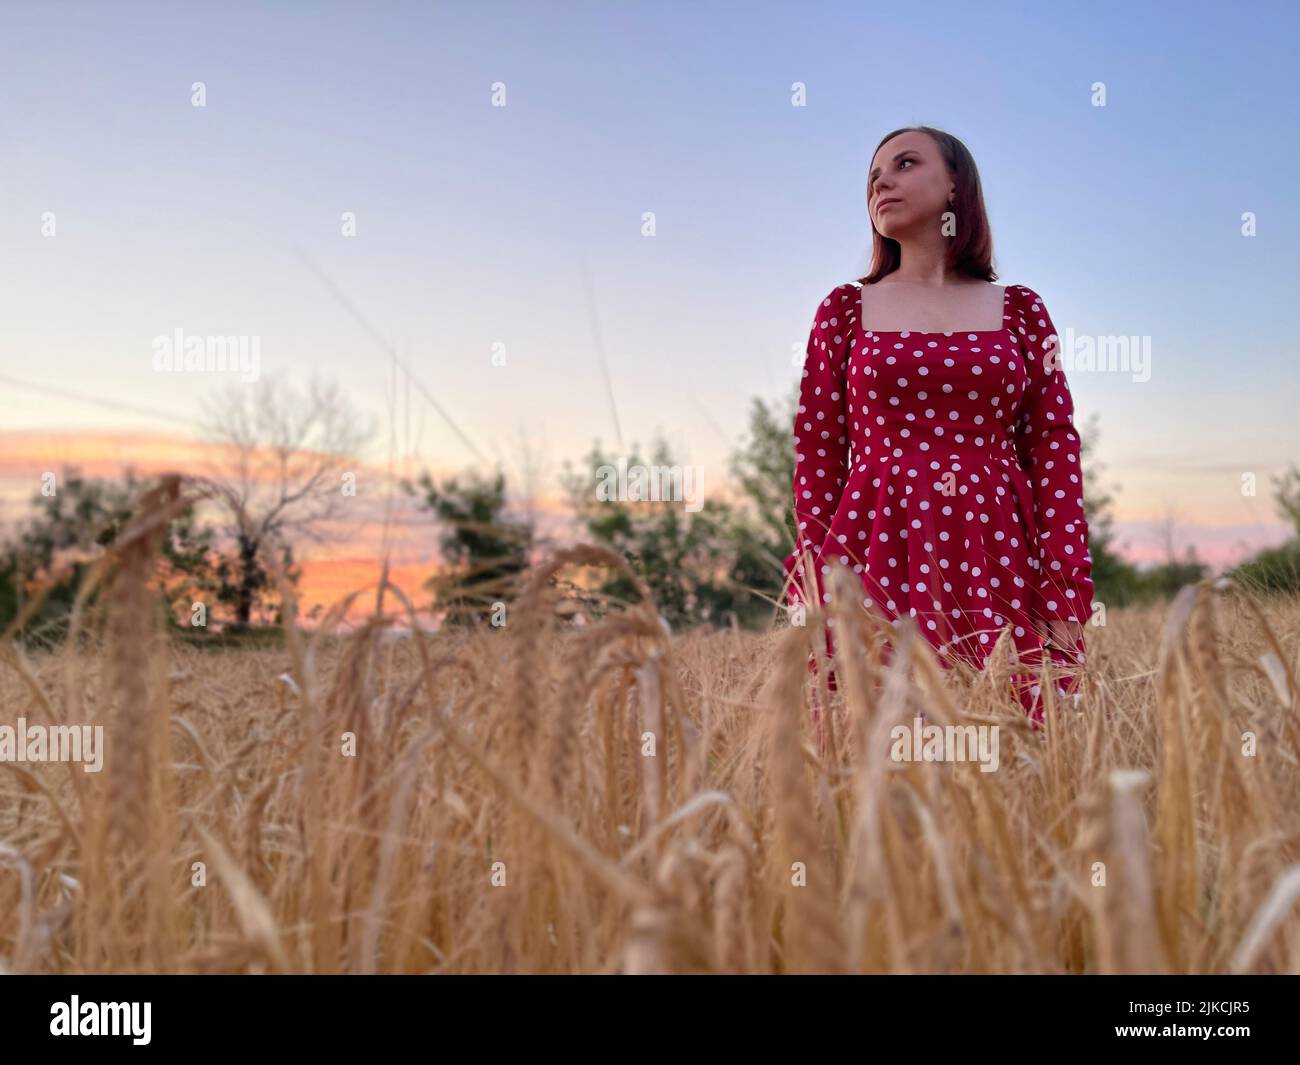 Young woman in red dress standing in wheat field at sunset Stock Photo